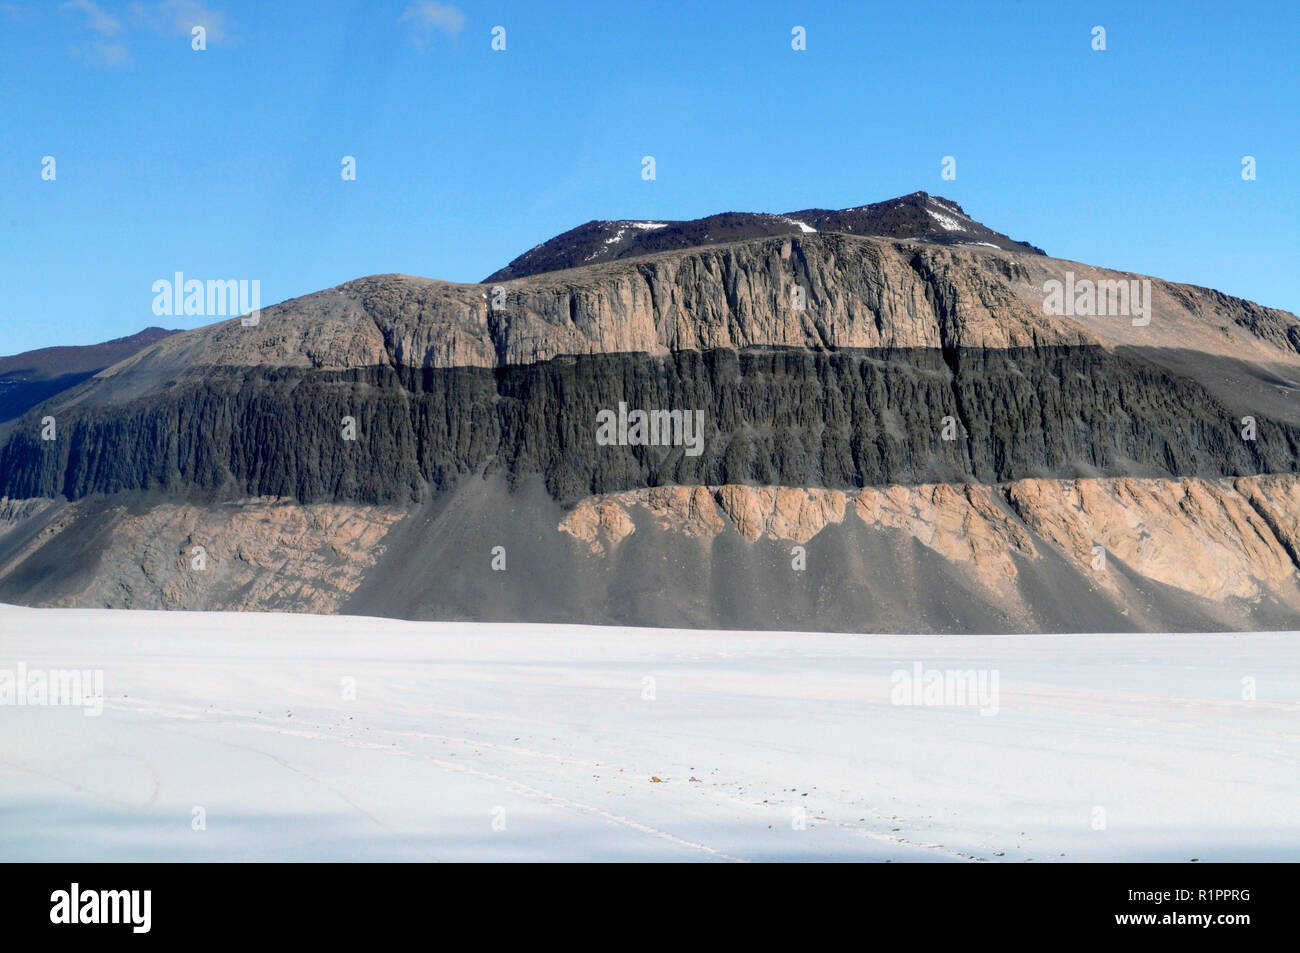 Upper Taylor Valley, McMurdo Dry Valleys, Antarctica showing bands of Ferrar Dolerite layered with Beacon Sandstone Stock Photo